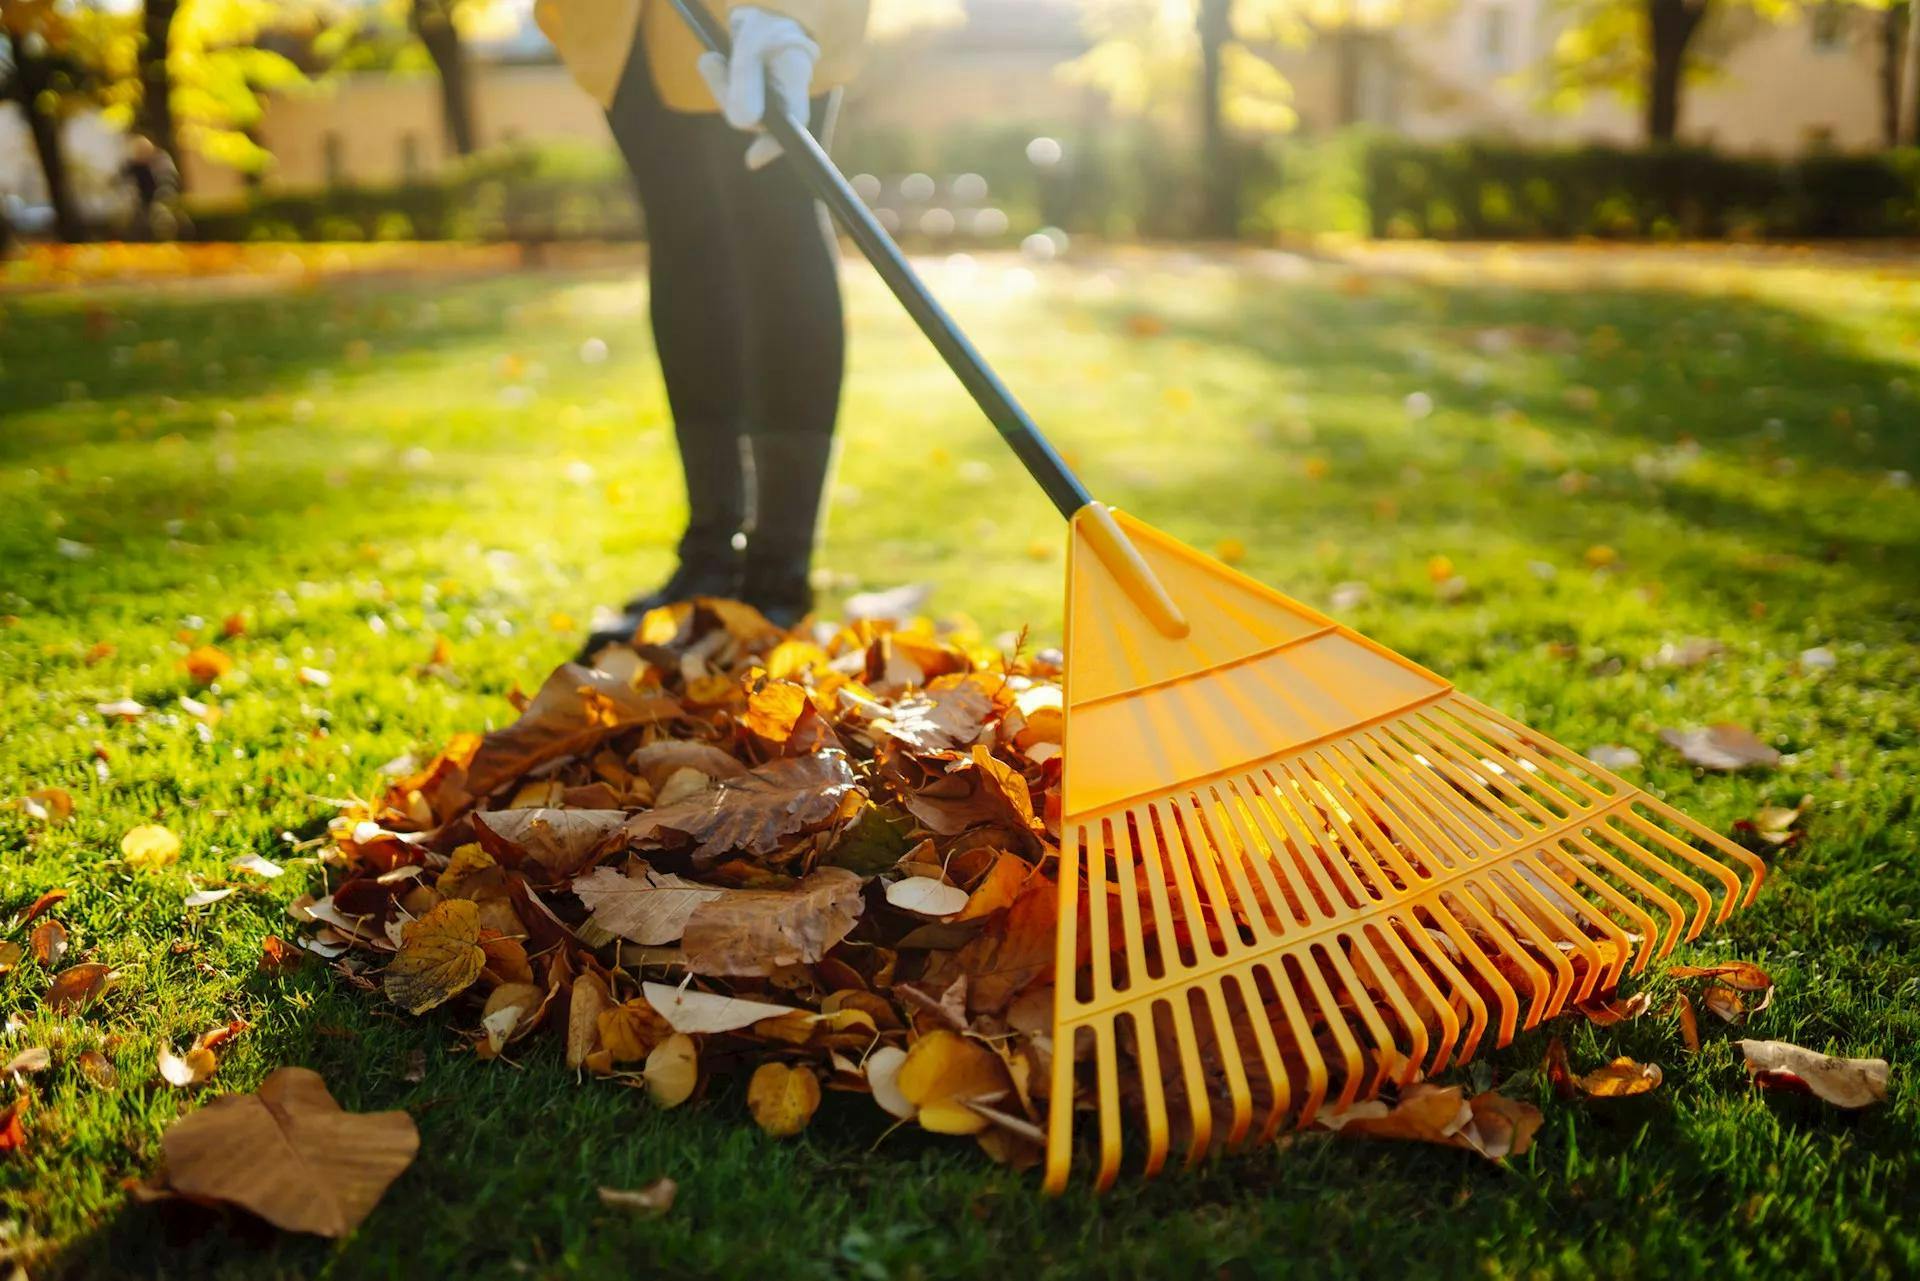 Autumn safety tips for outdoor chores